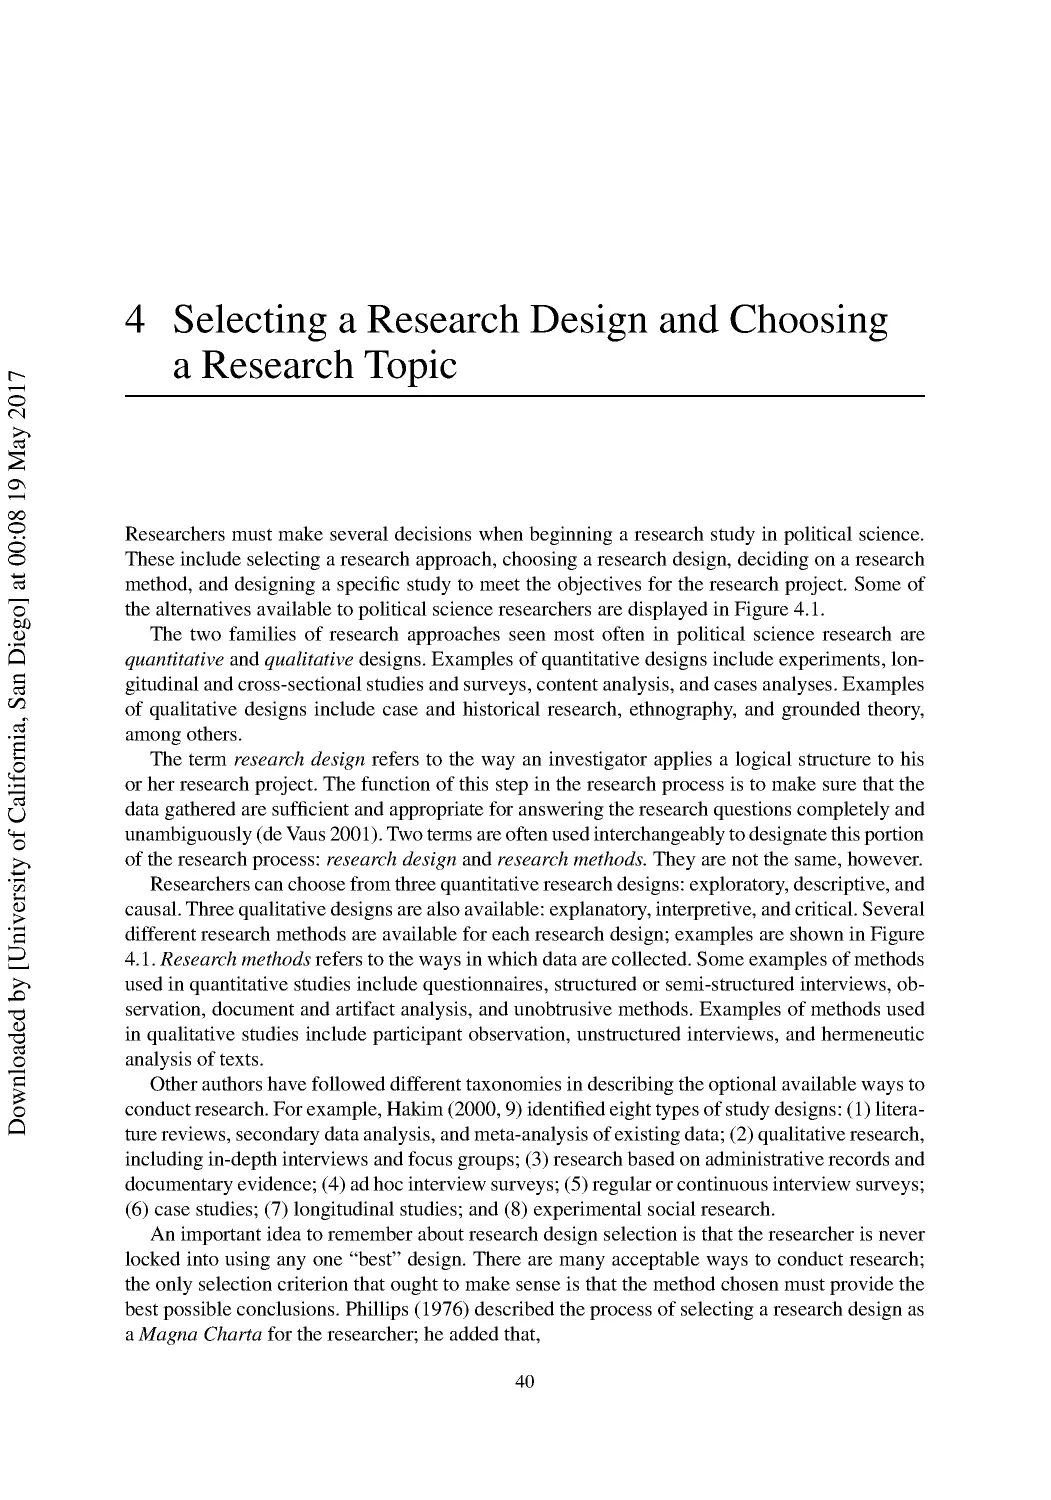 4 Selecting a Research Design and Choosing a Research Topic